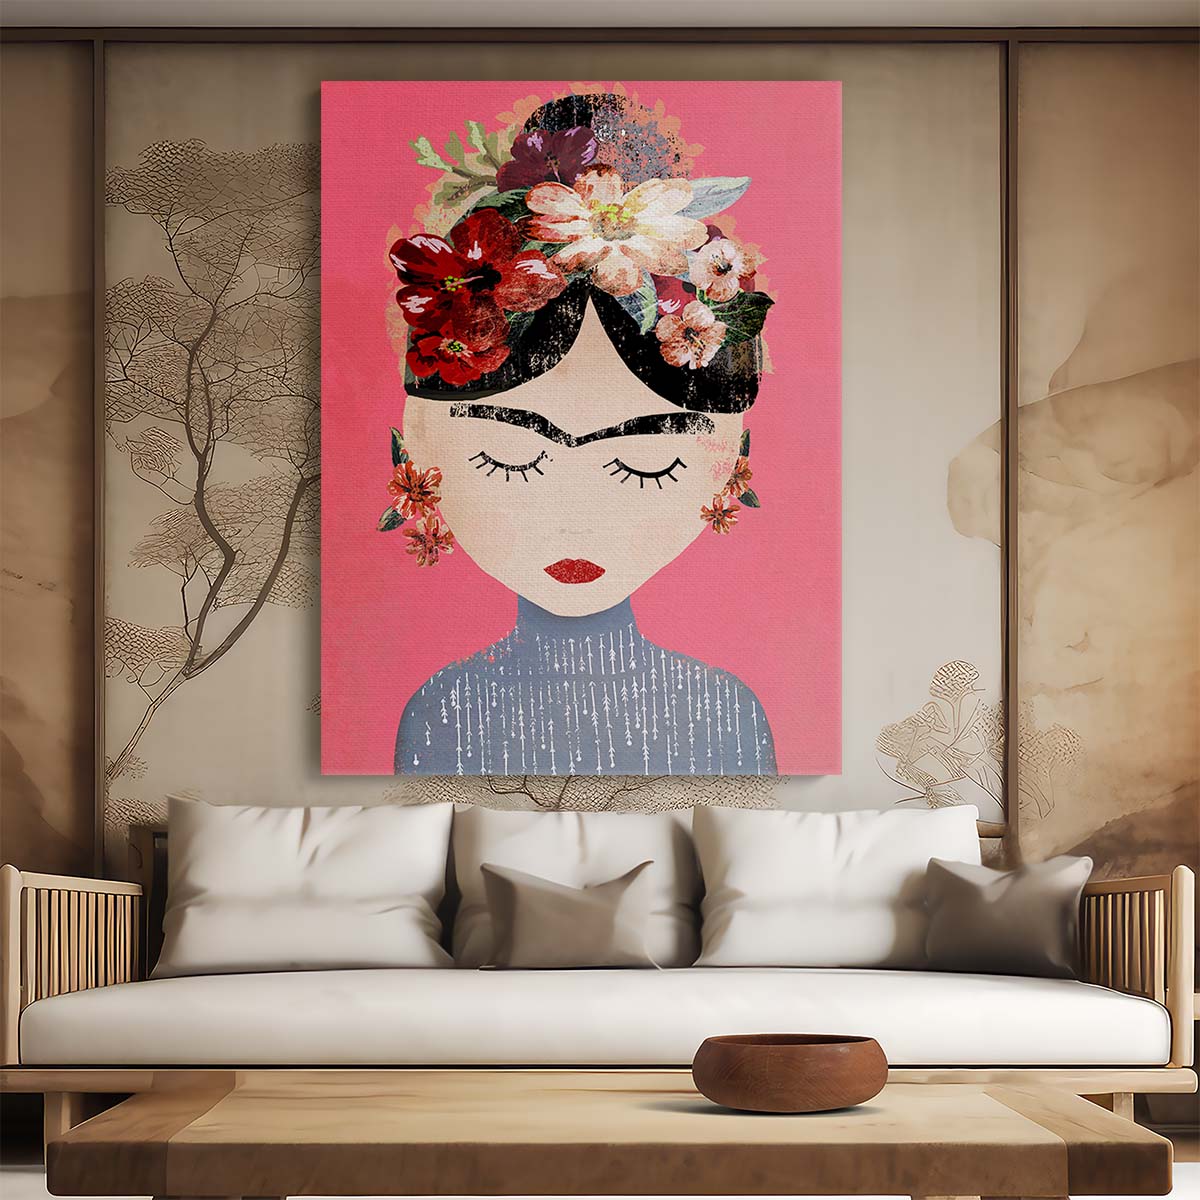 Frida Kahlo Floral Portrait Illustration with Vibrant Pink Background by Luxuriance Designs, made in USA